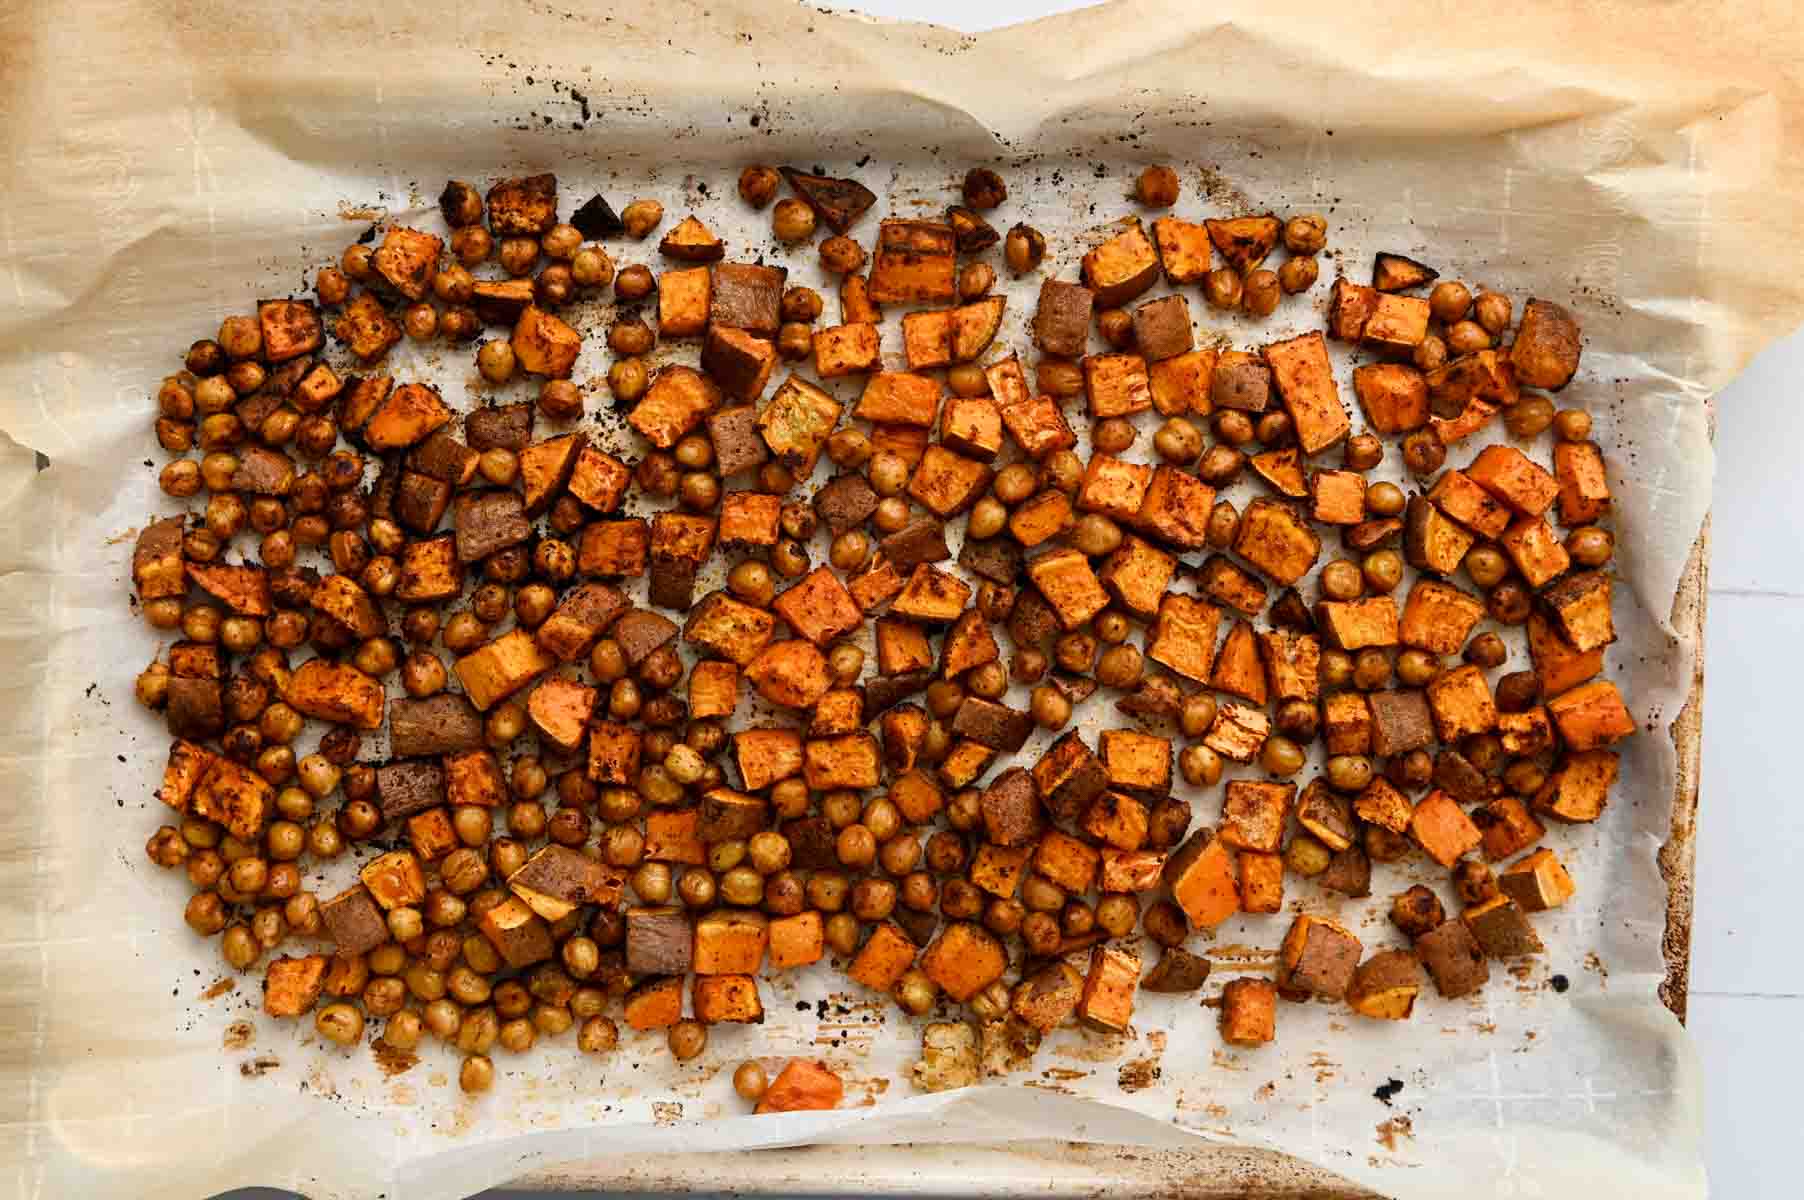 Cubed sweet potato and chickpeas after roasting.